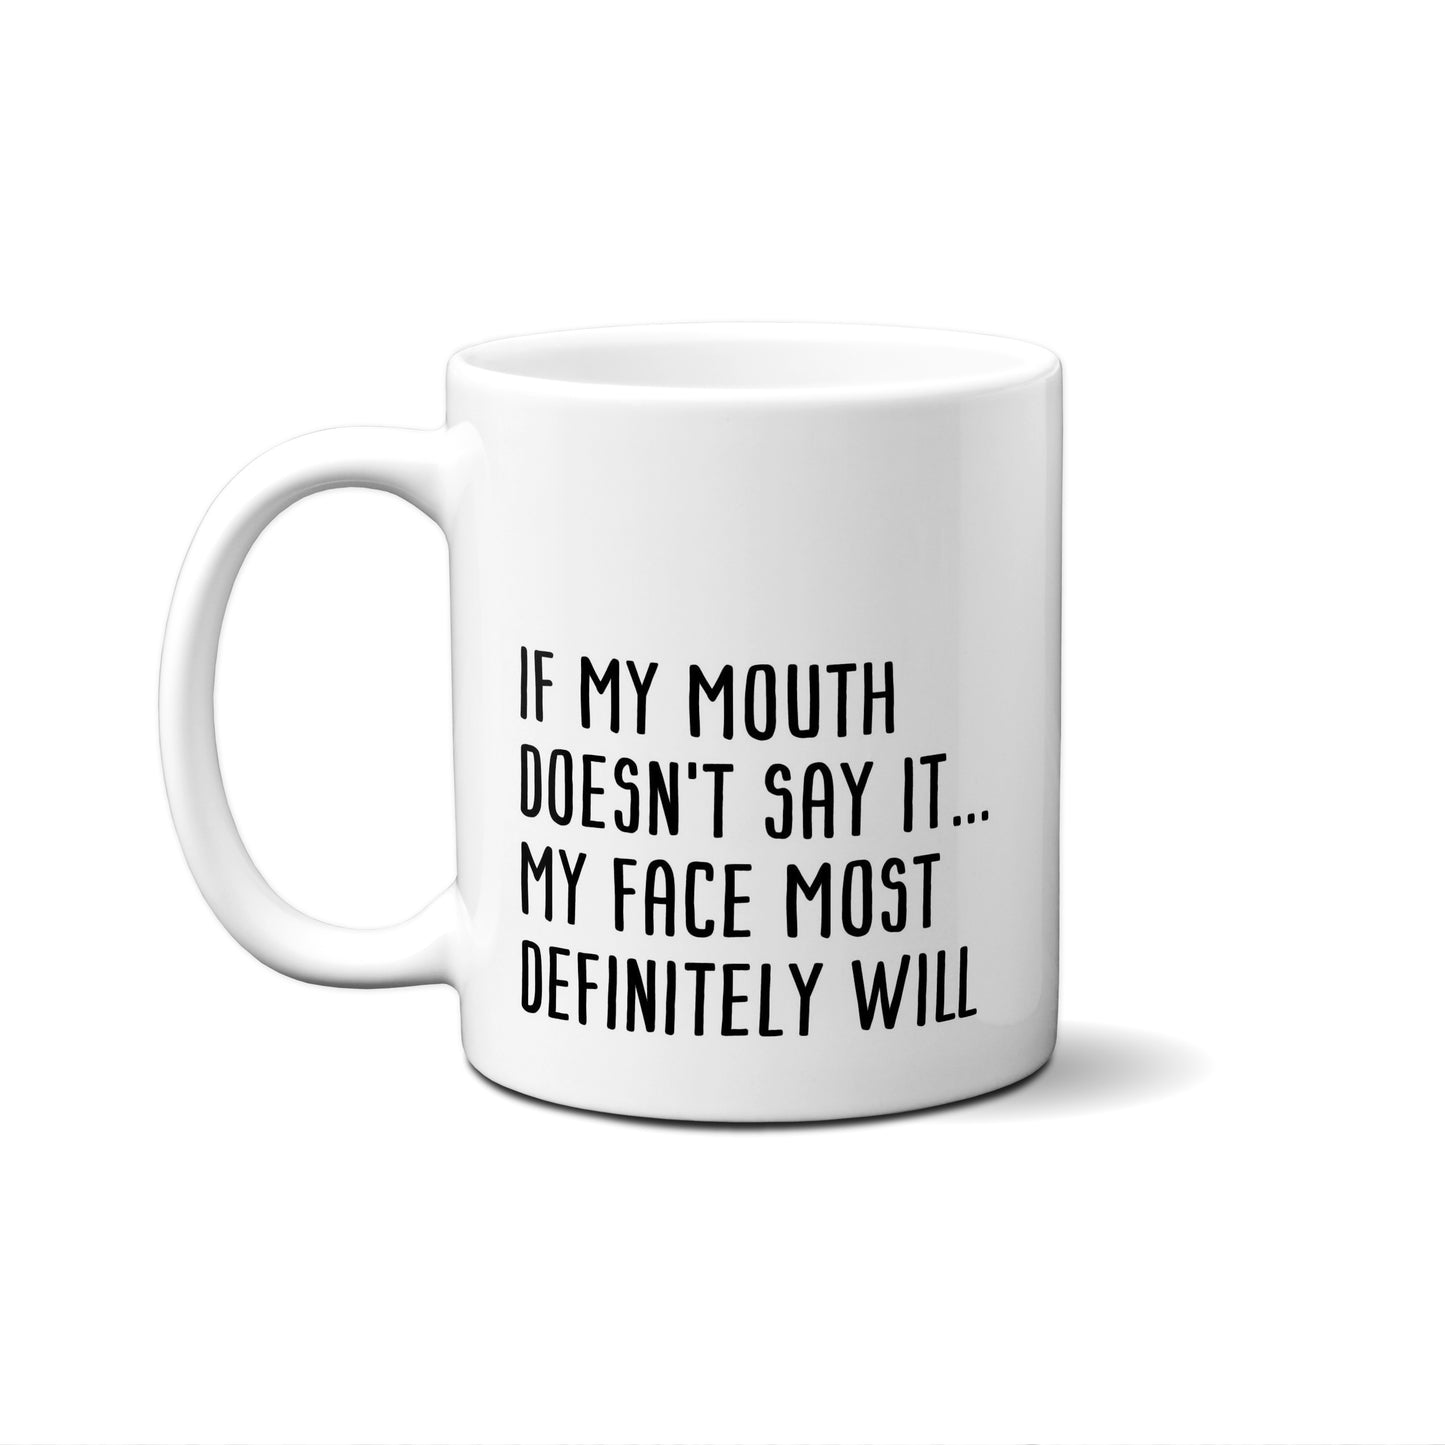 If My Mouth Doesn't Say It...My Face Most Definitely Will Quote Mug